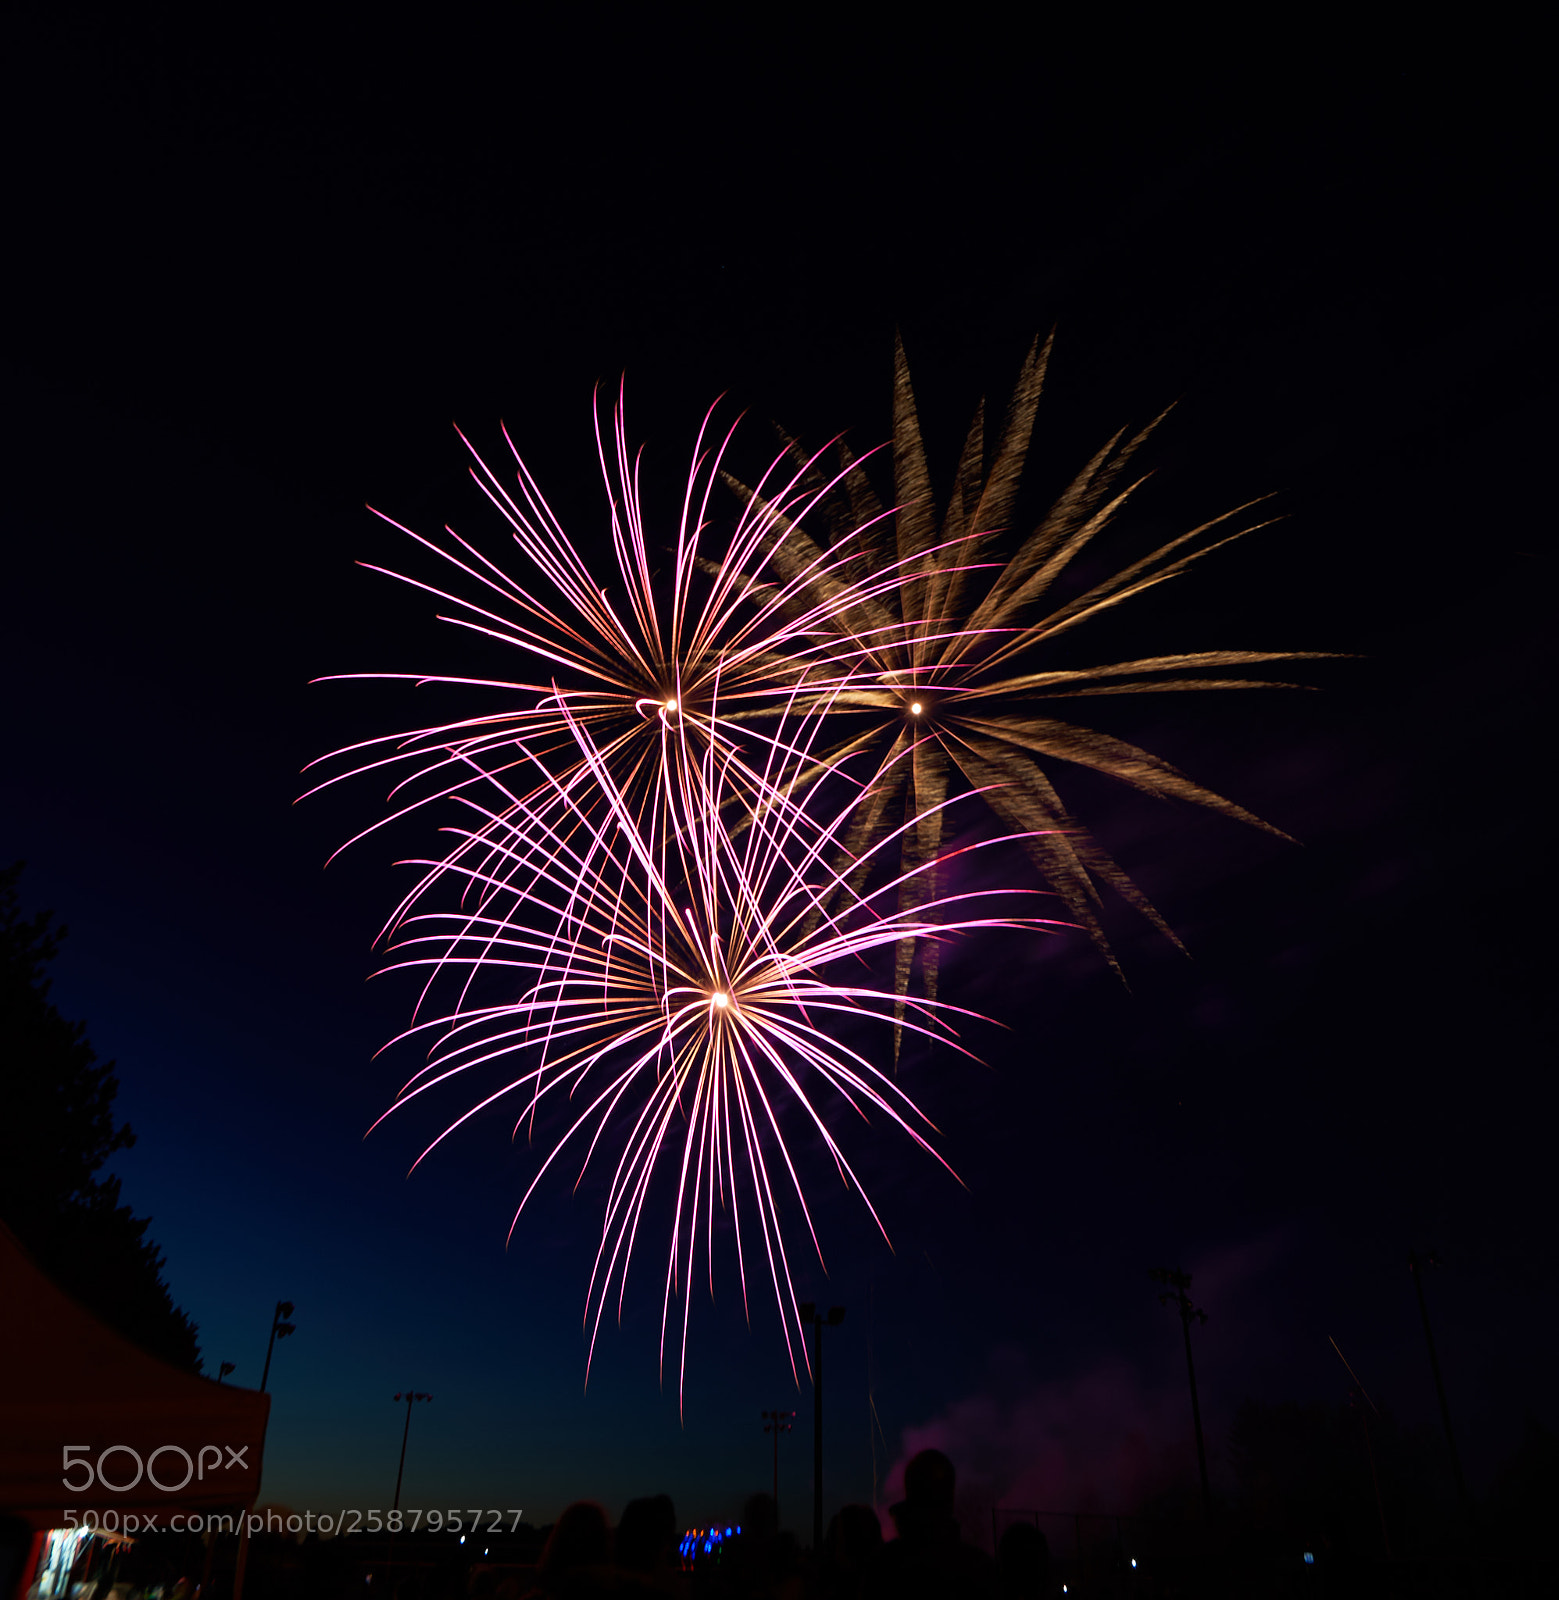 Sony a7 III sample photo. Victoria day fireworks photography